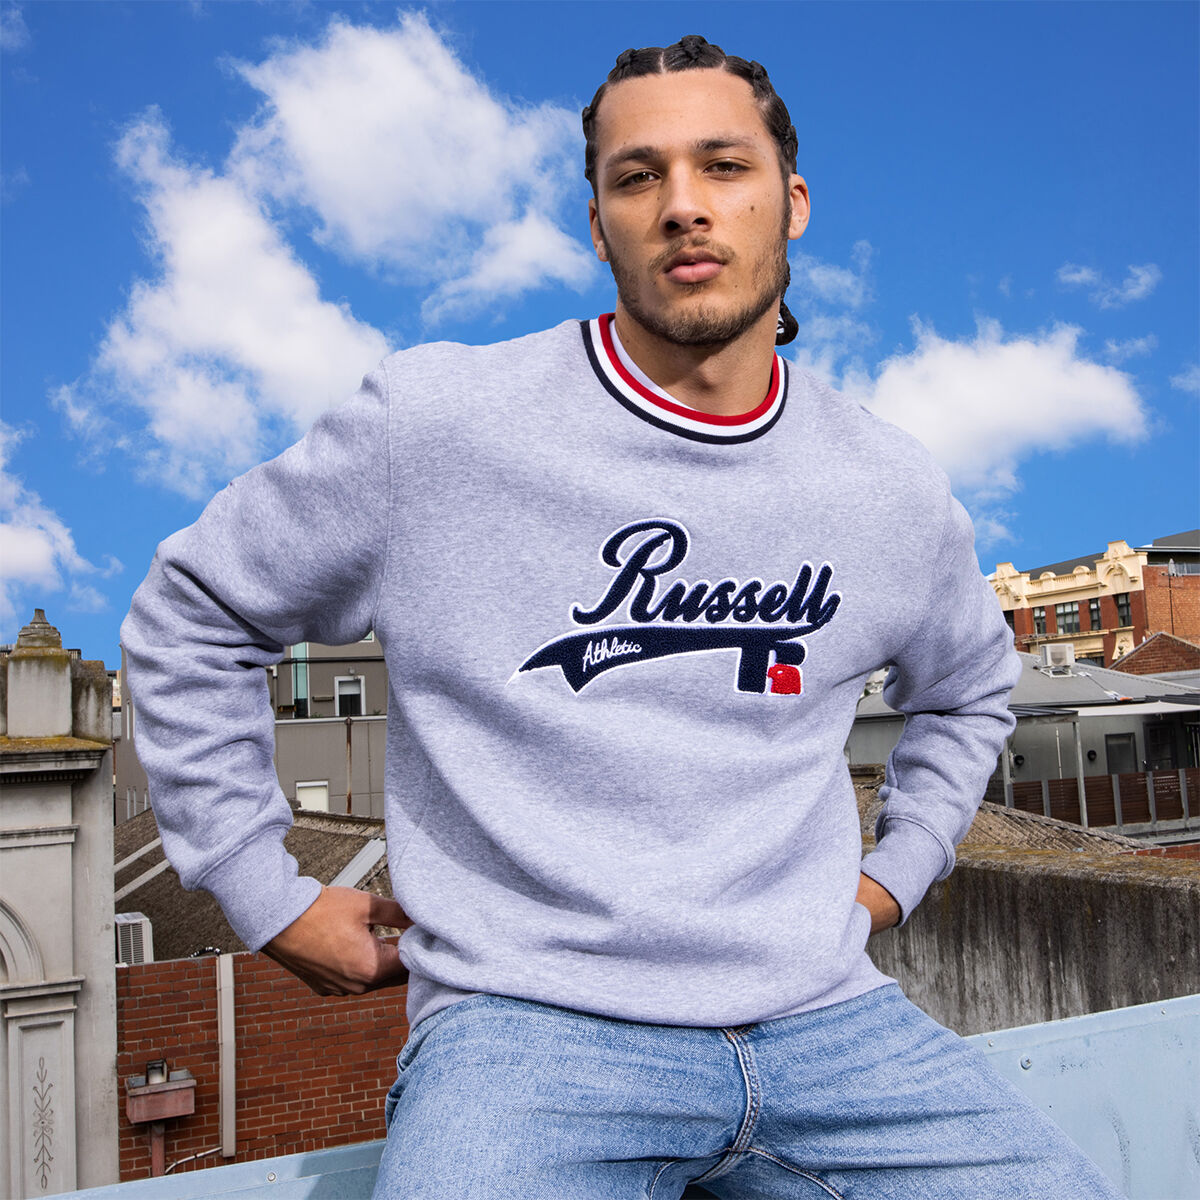 Russell Athletic - T-Shirts, Hoodies, Pants, Sweaters